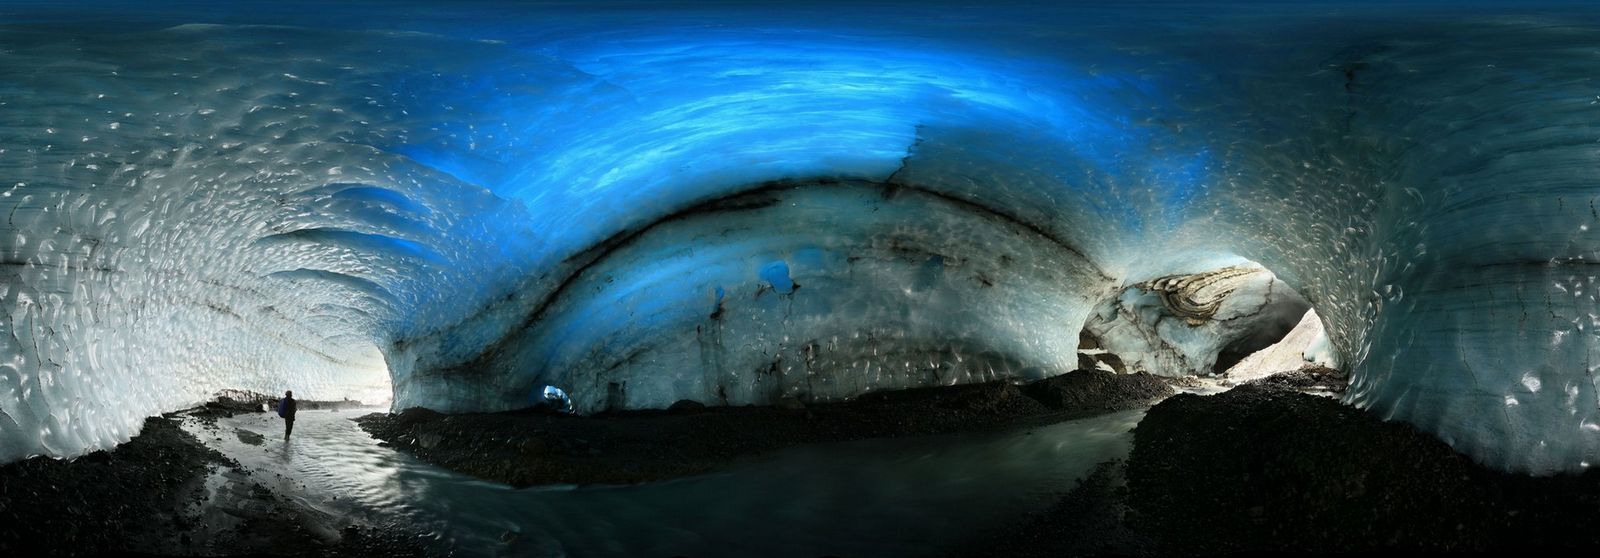 A 360 degree pano of inside the Kverkfj&ouml;ll Ice caves on the northern edge of the Vatnaj&ouml;kull ice cap, in Iceland. This...